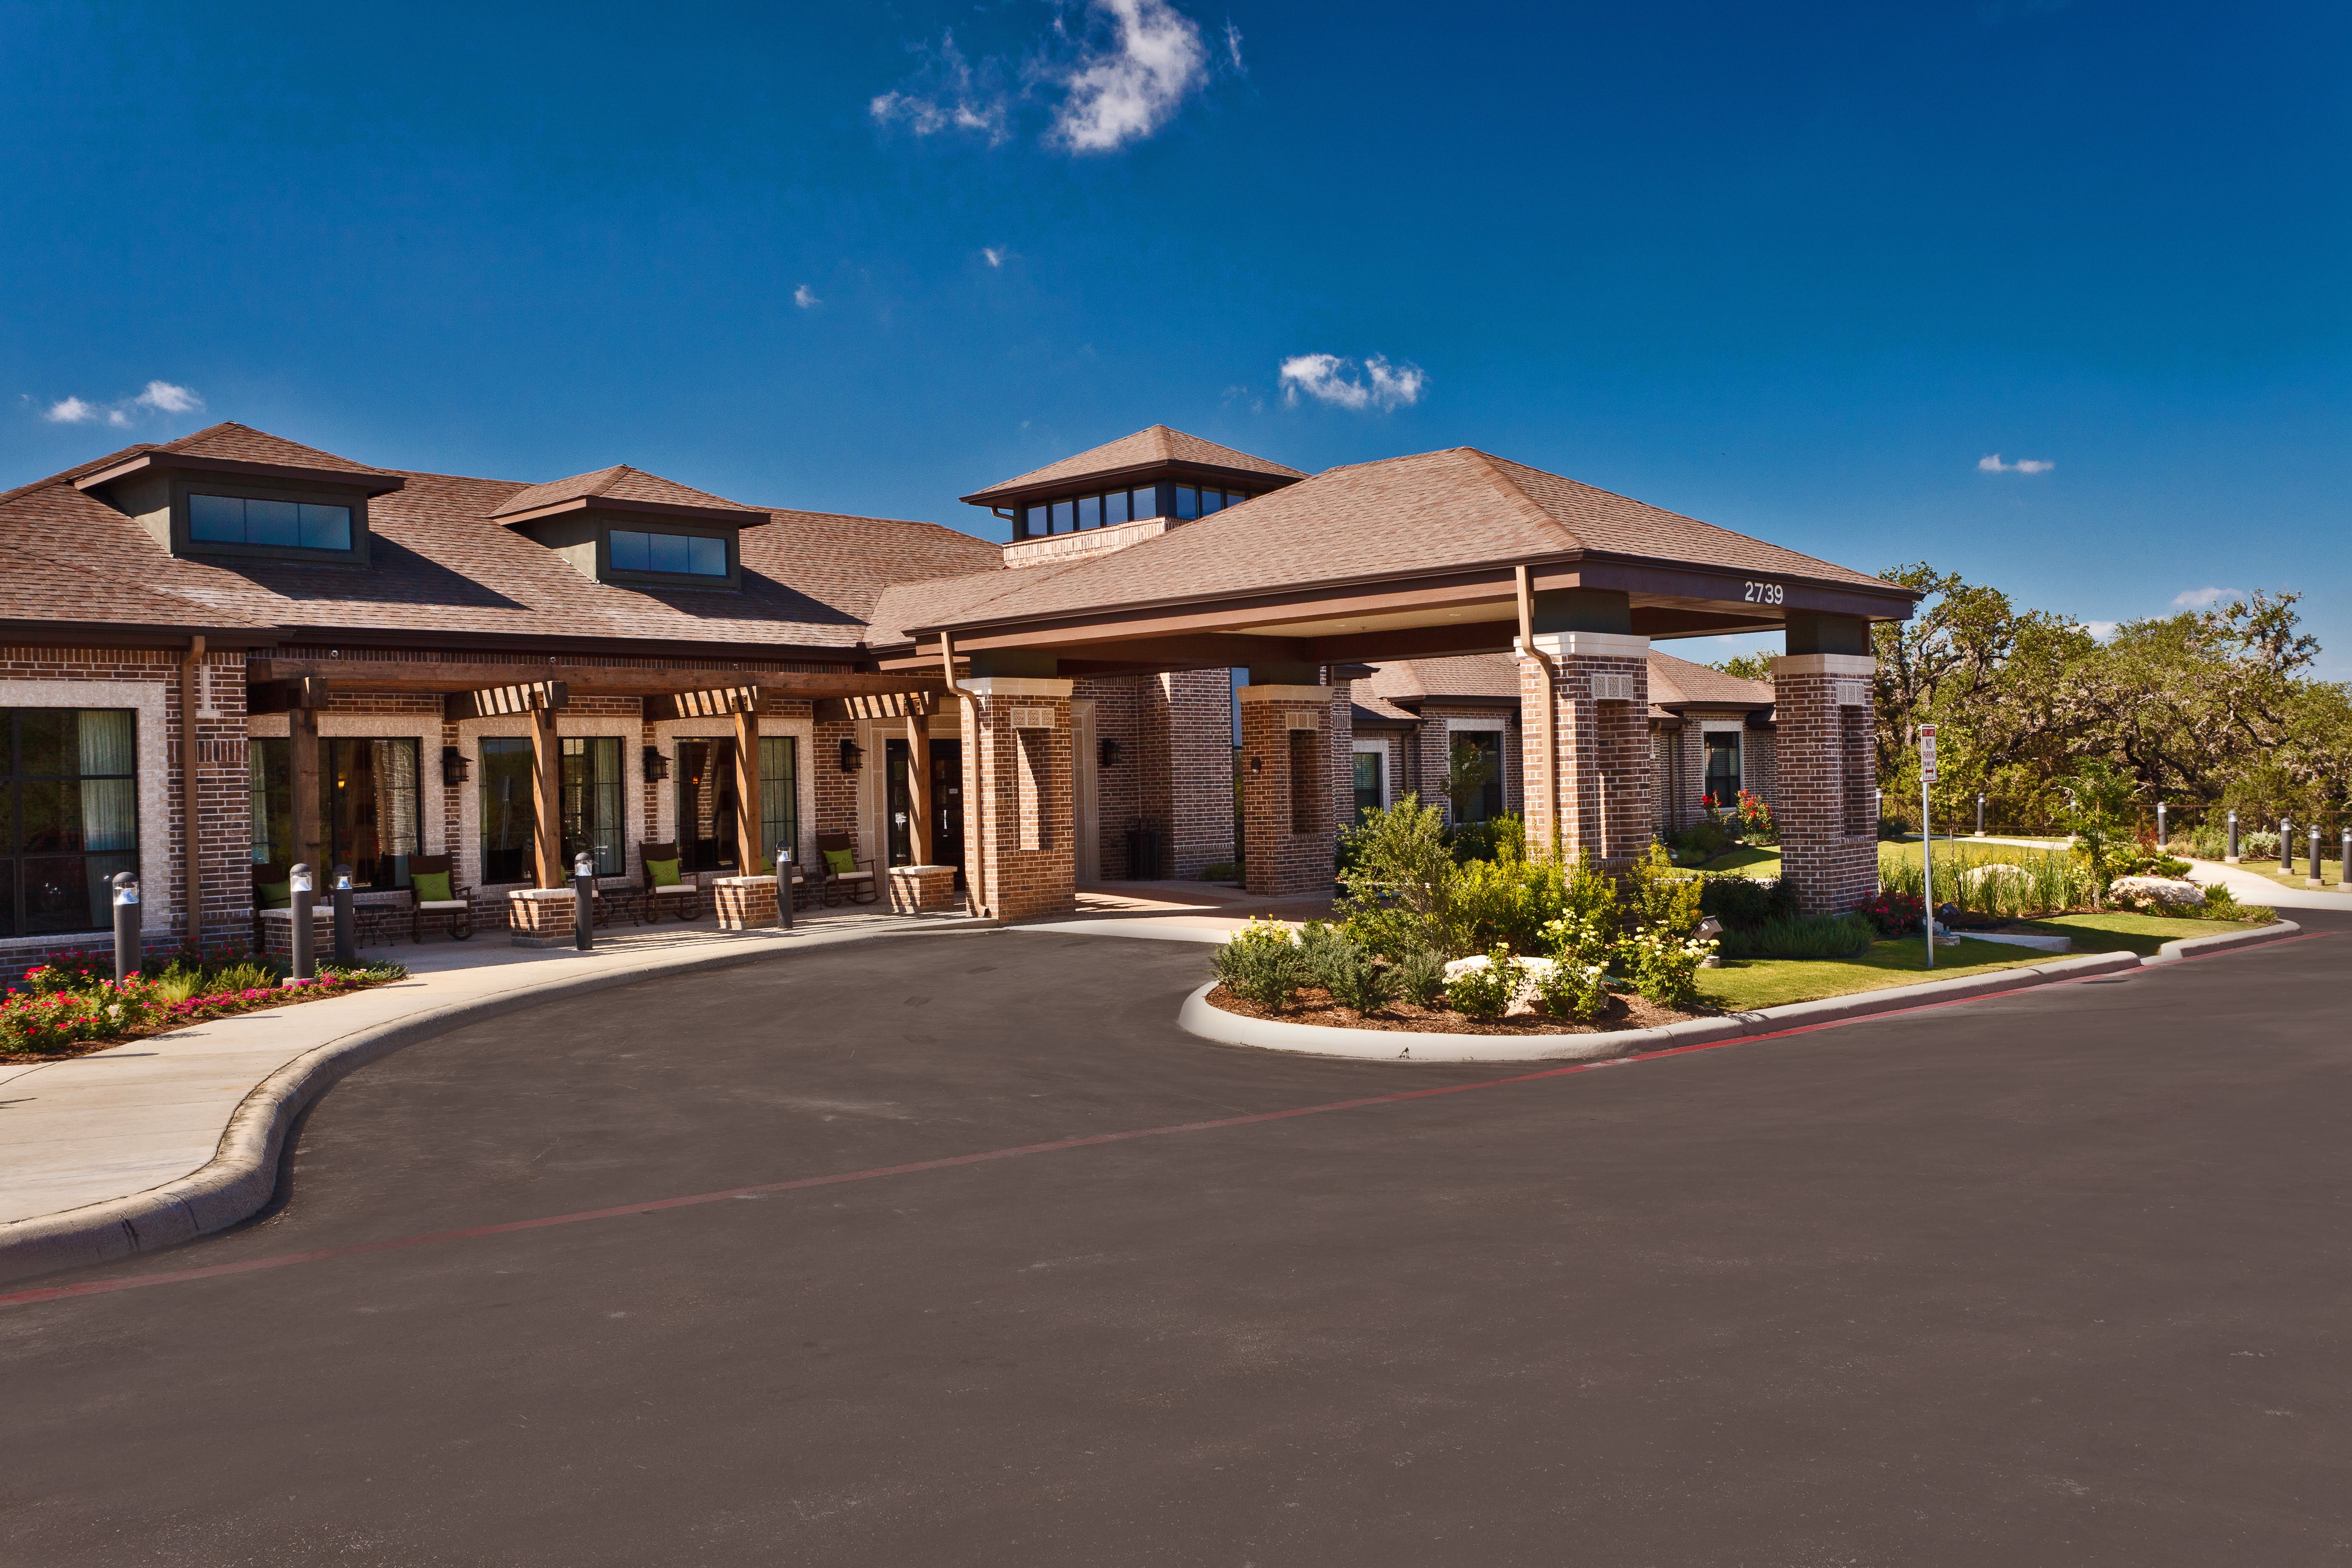 Adante Assisted Living and Memory Care community exterior